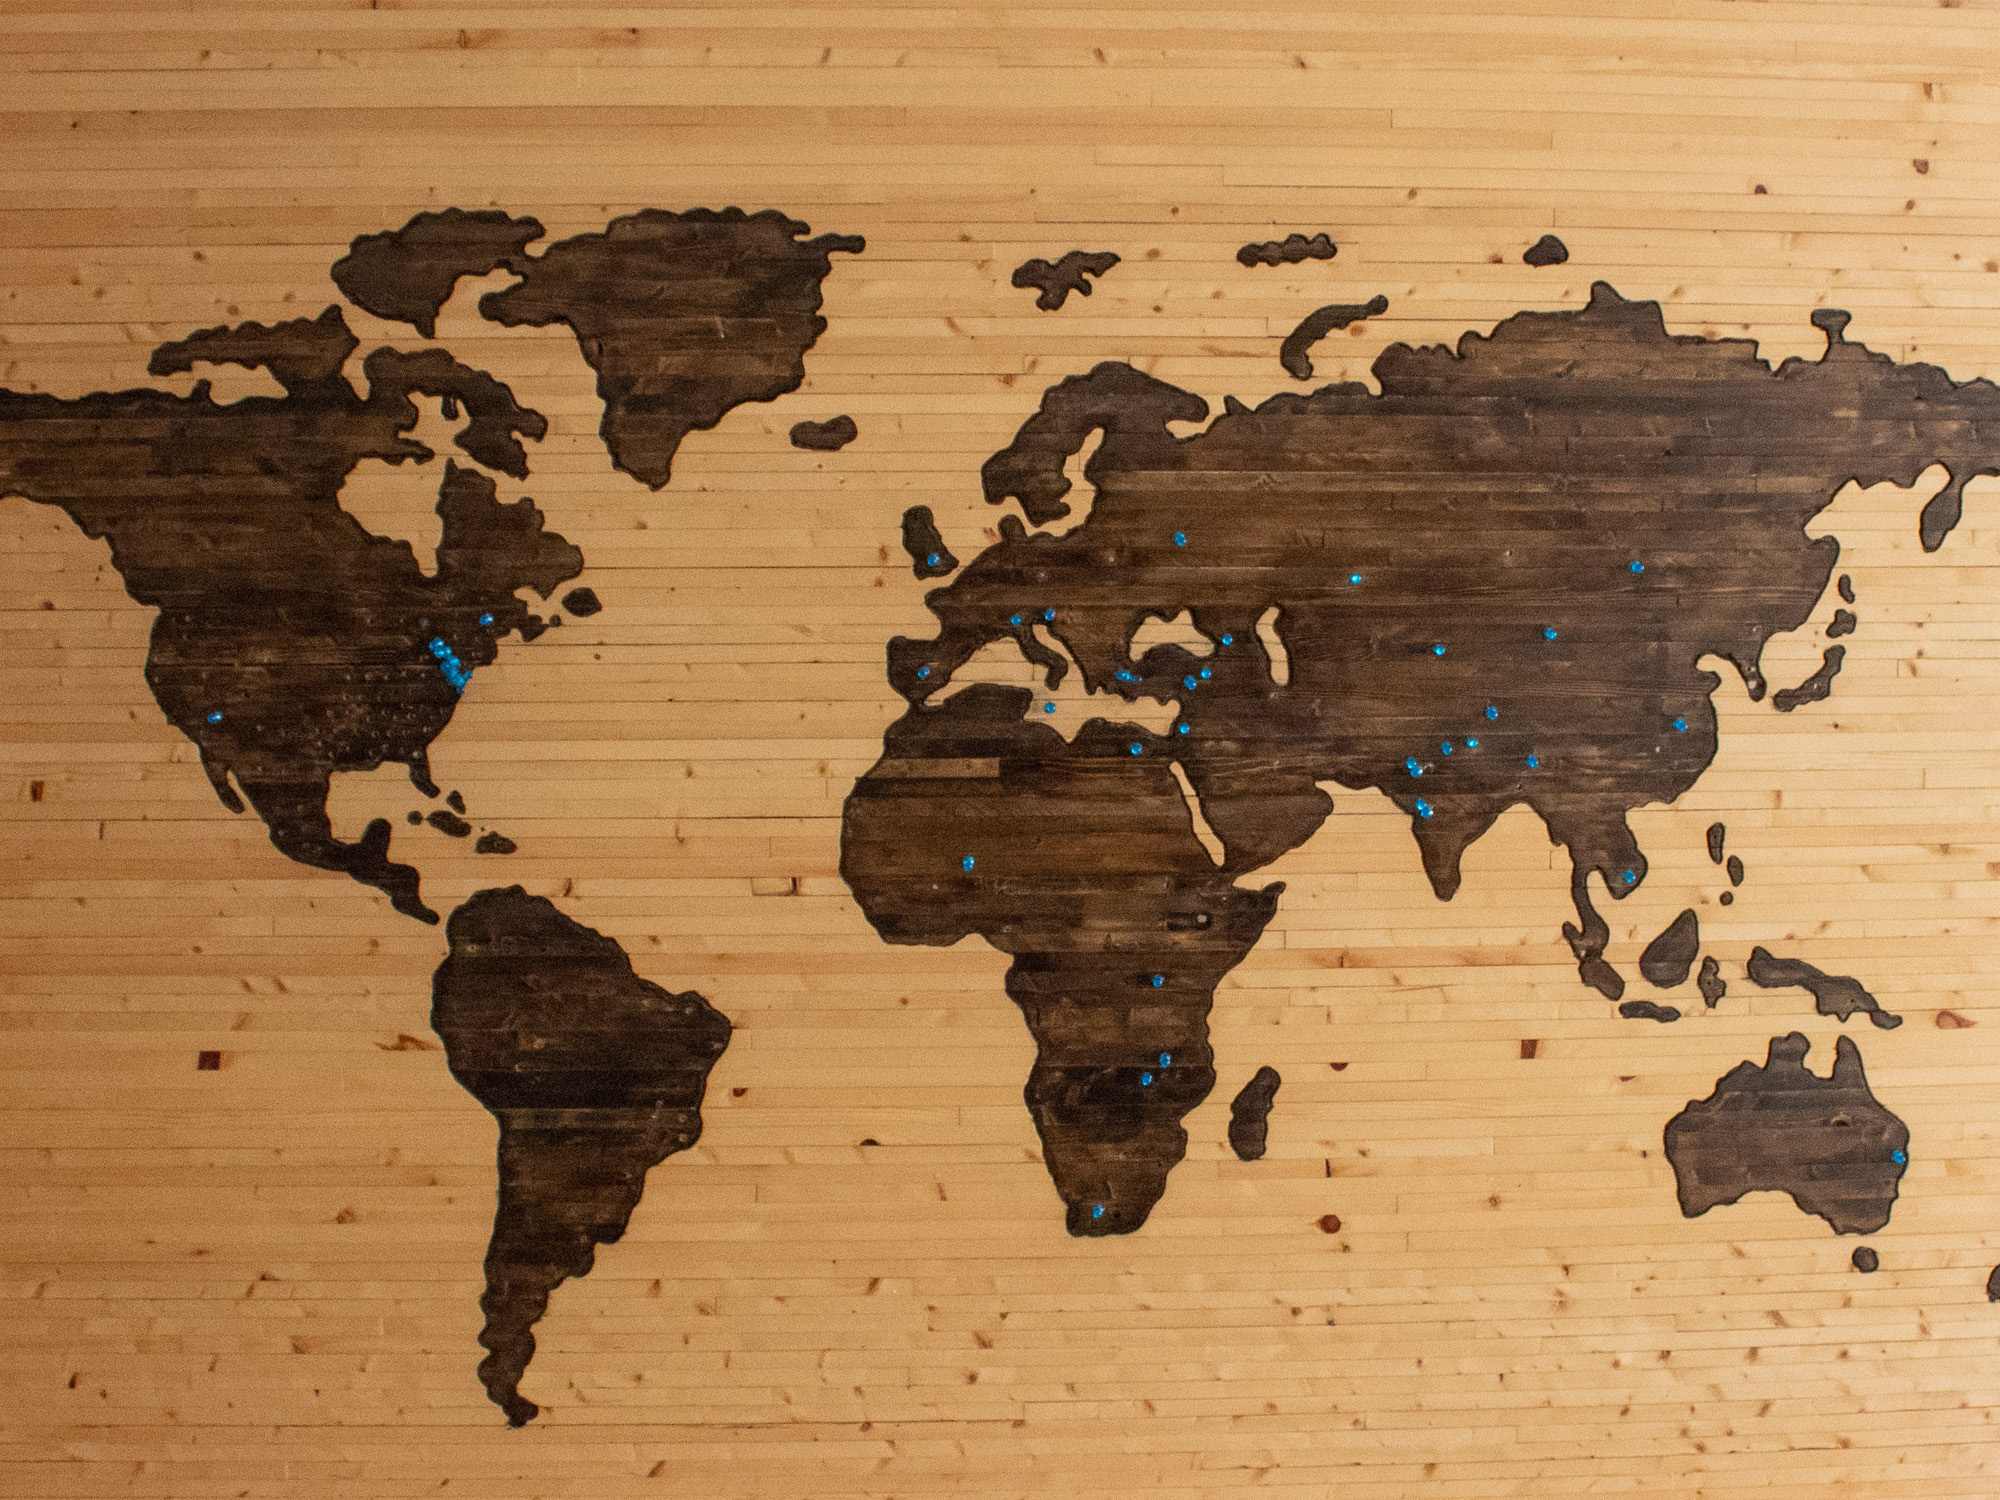 A map embossed onto a piece of wood in tones of tan and chocolate with blue pins dotting the continents